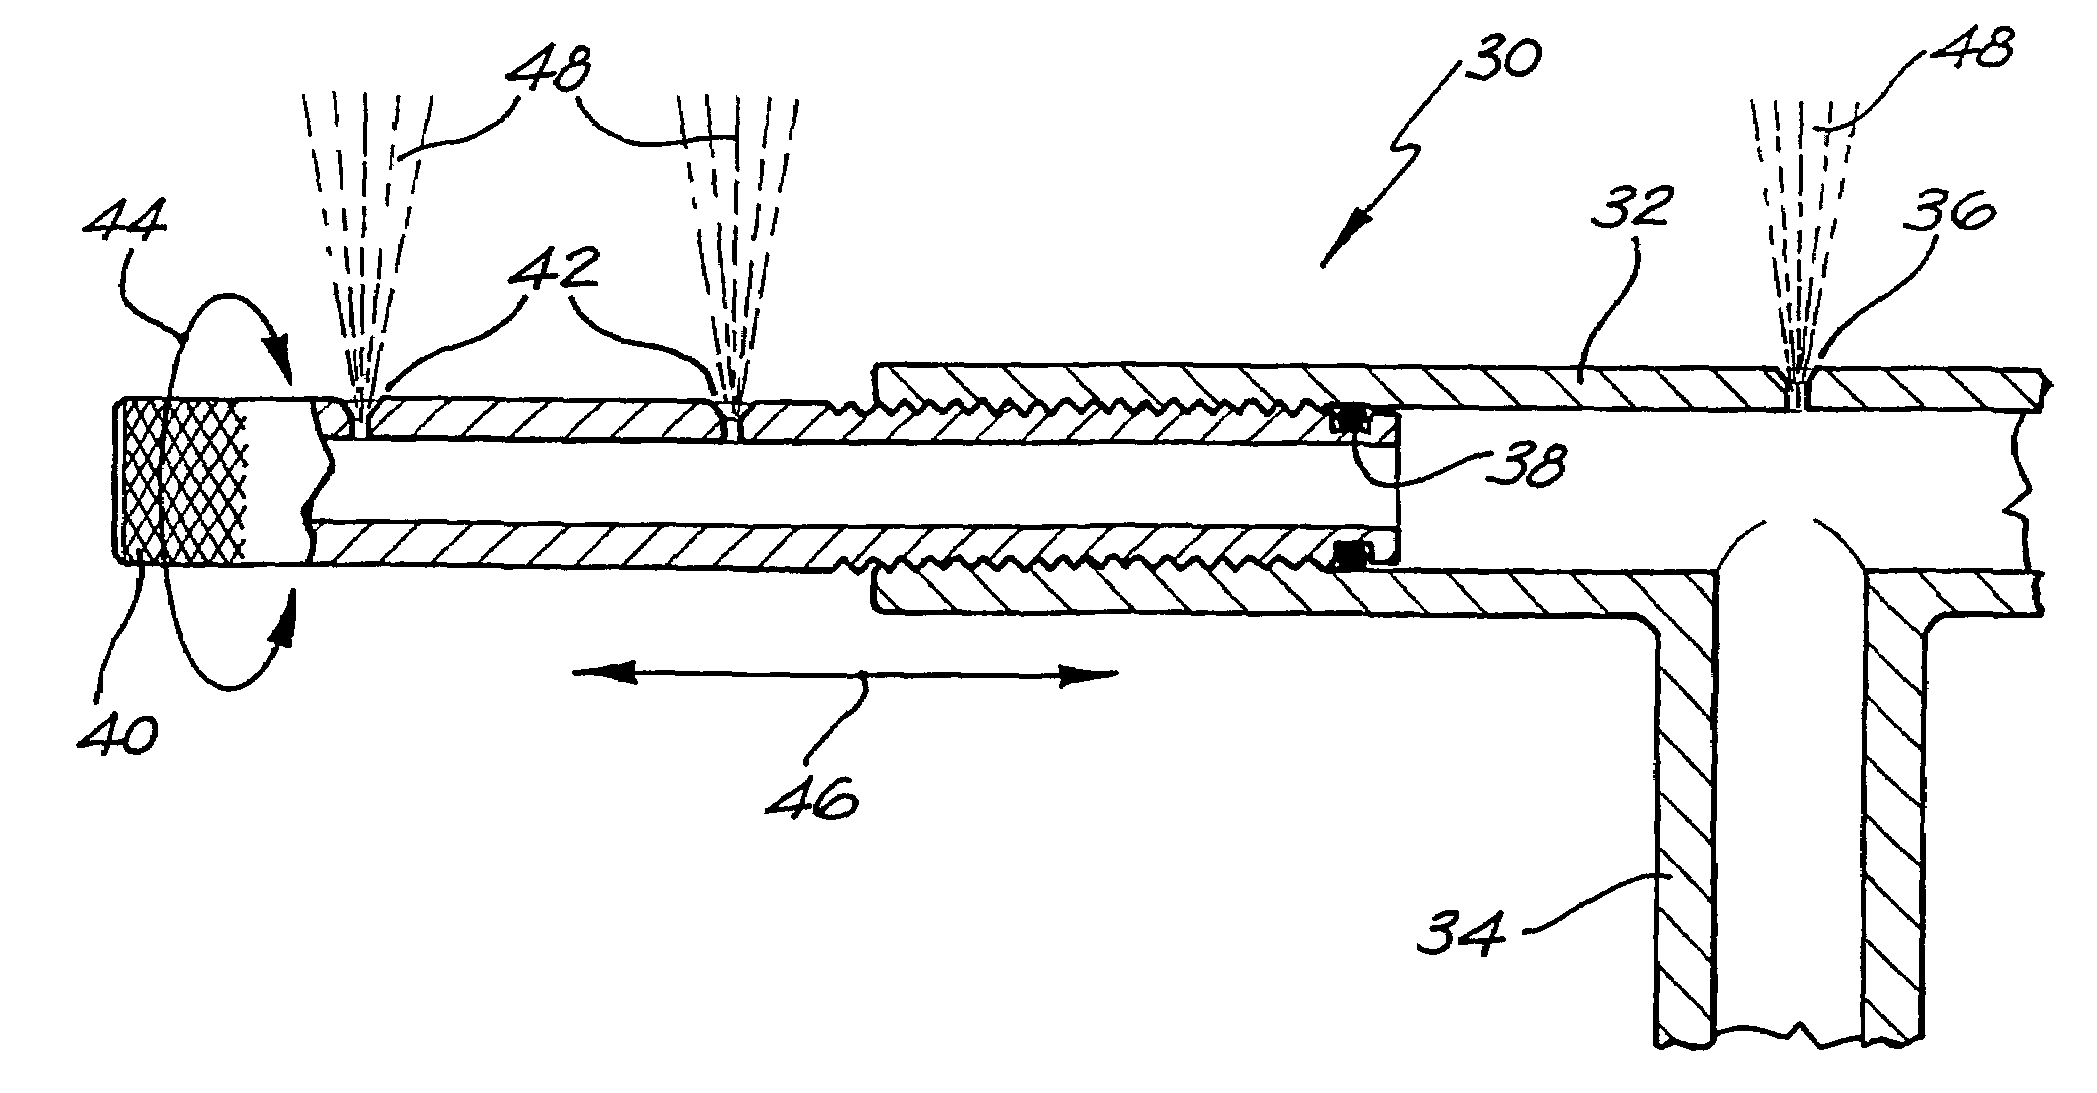 Pour-on application method and devices